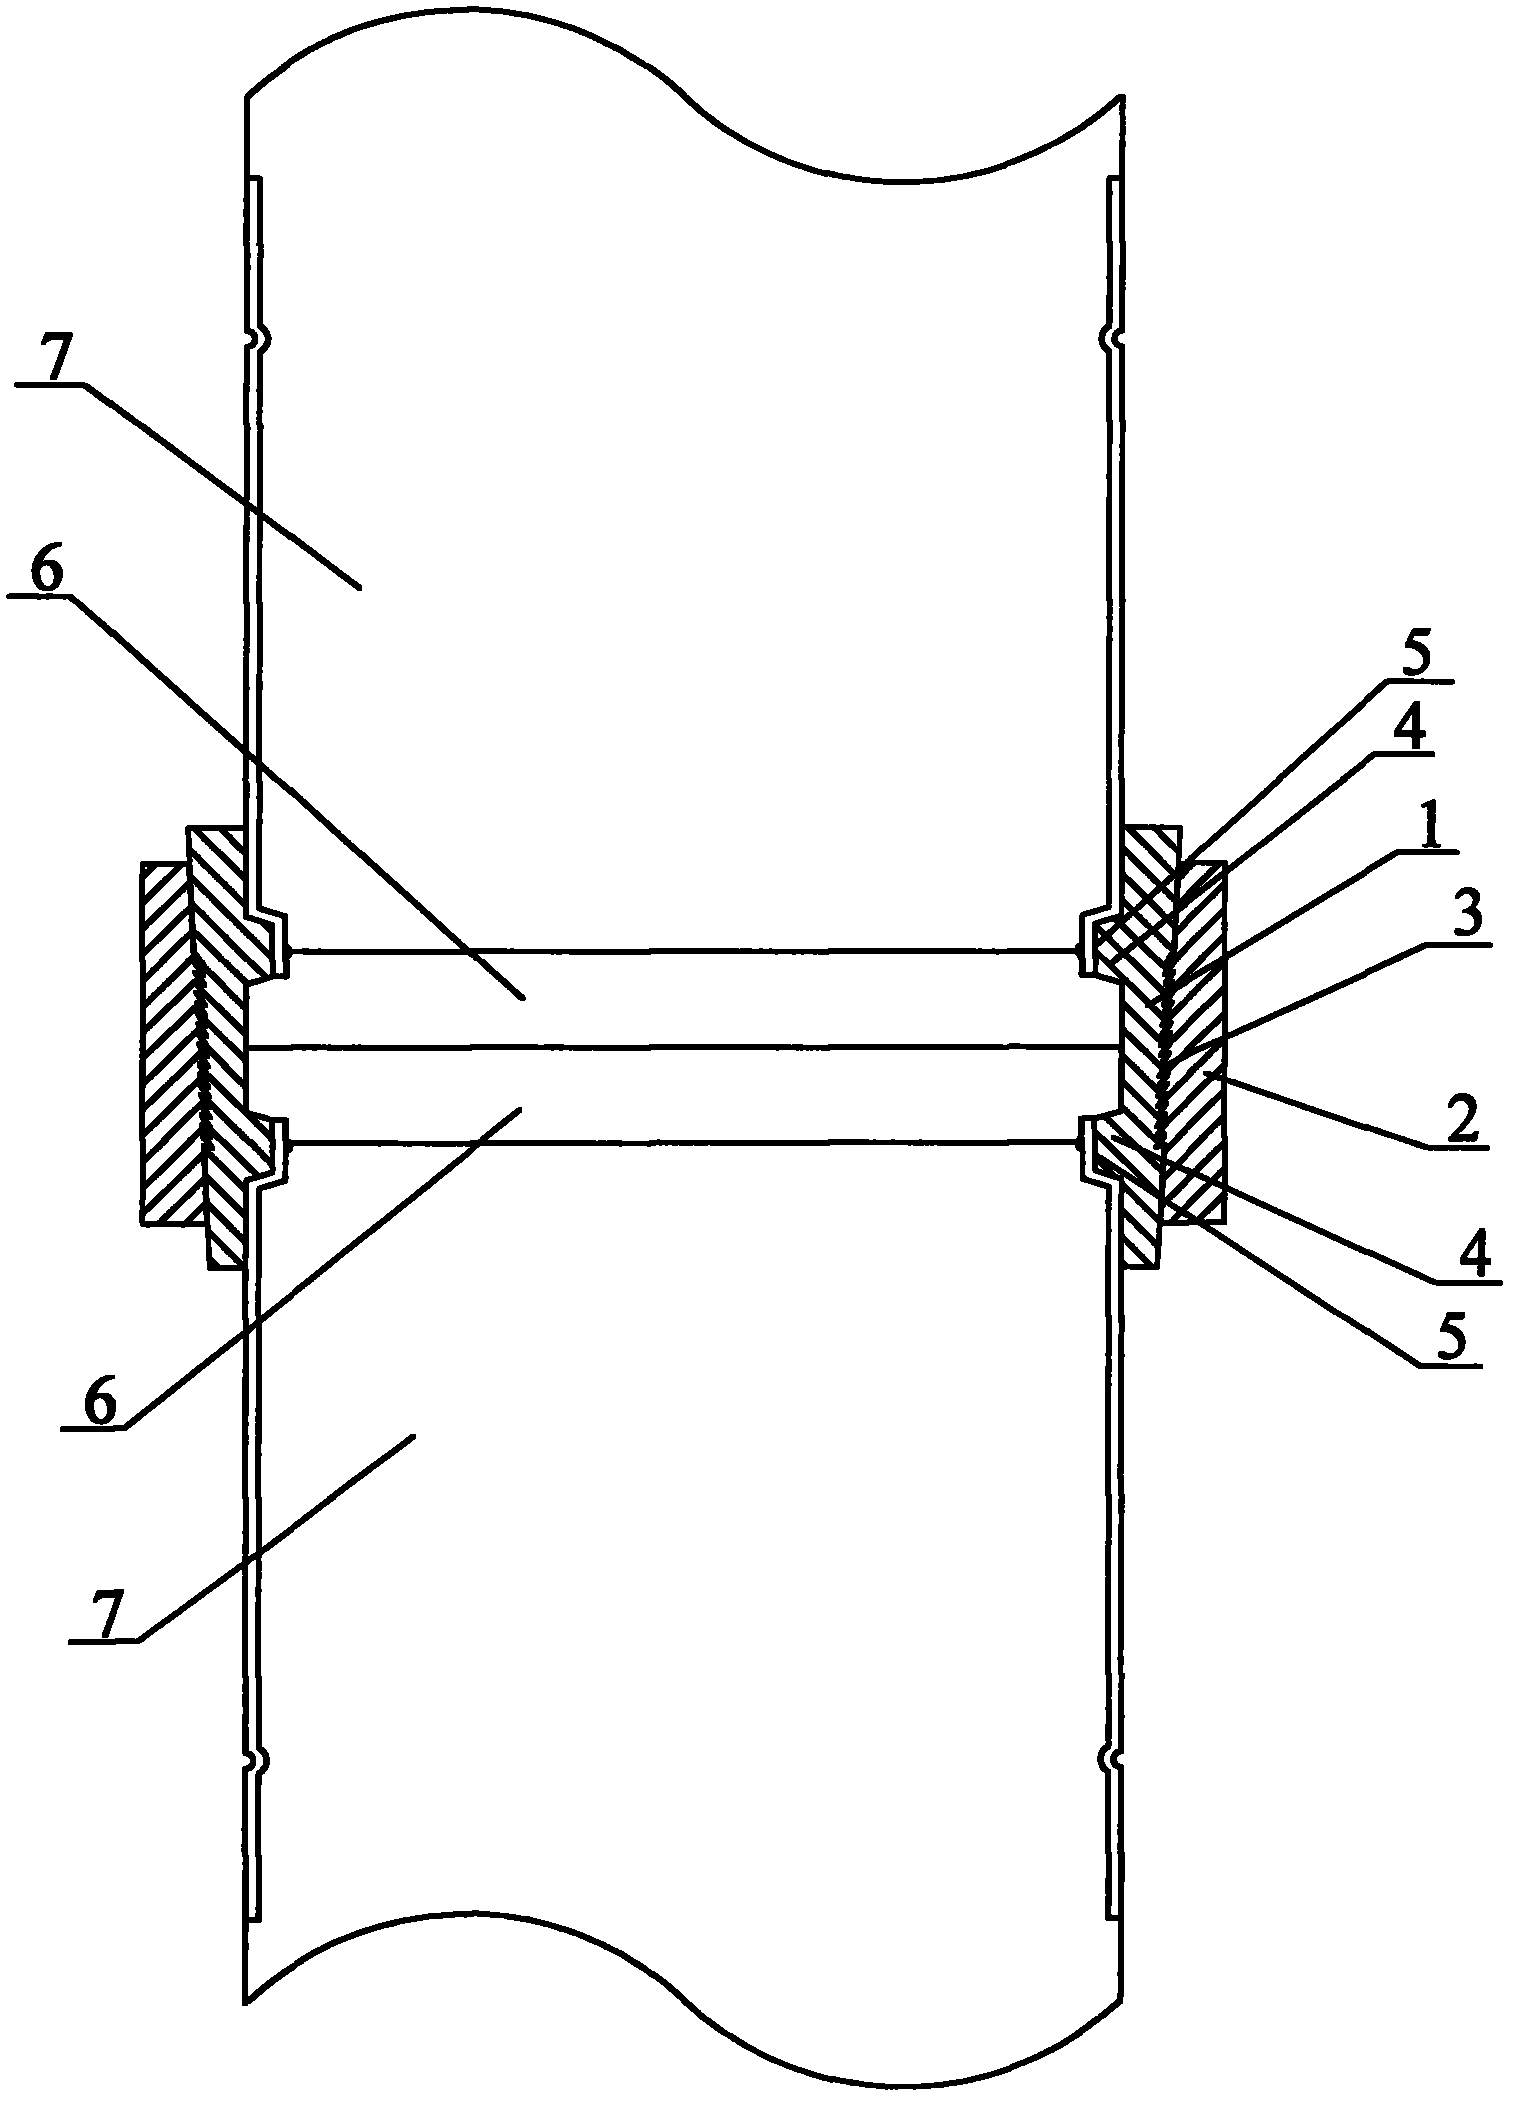 Pile splicing structure for precast piles